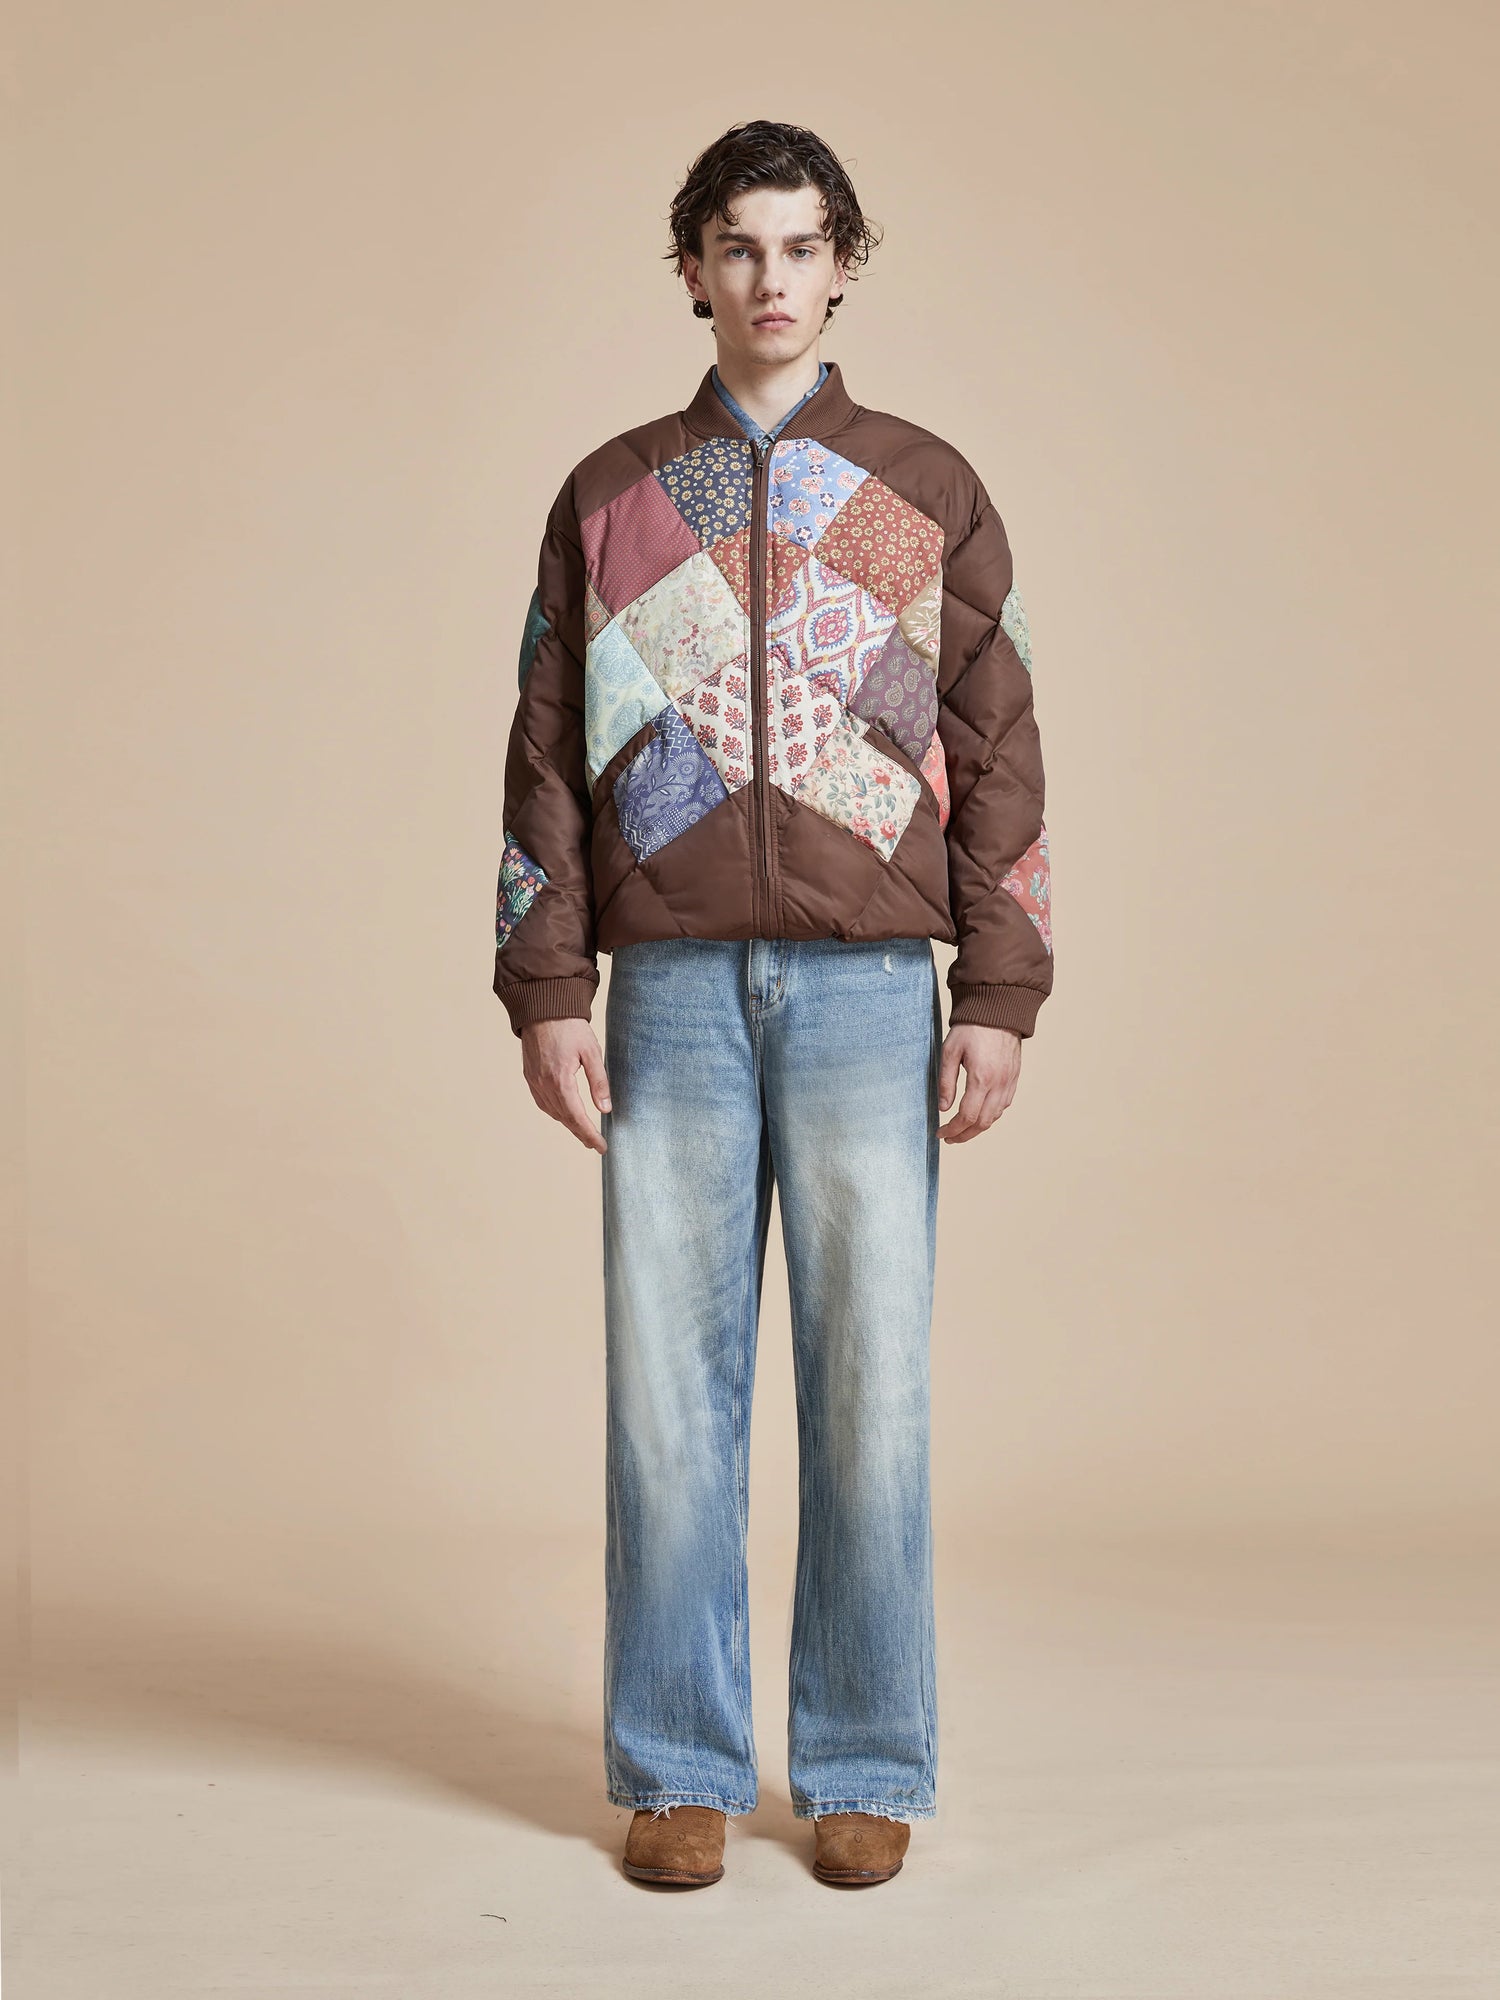 A man wearing a Found Diamond Quilt Patchwork Jacket and jeans.